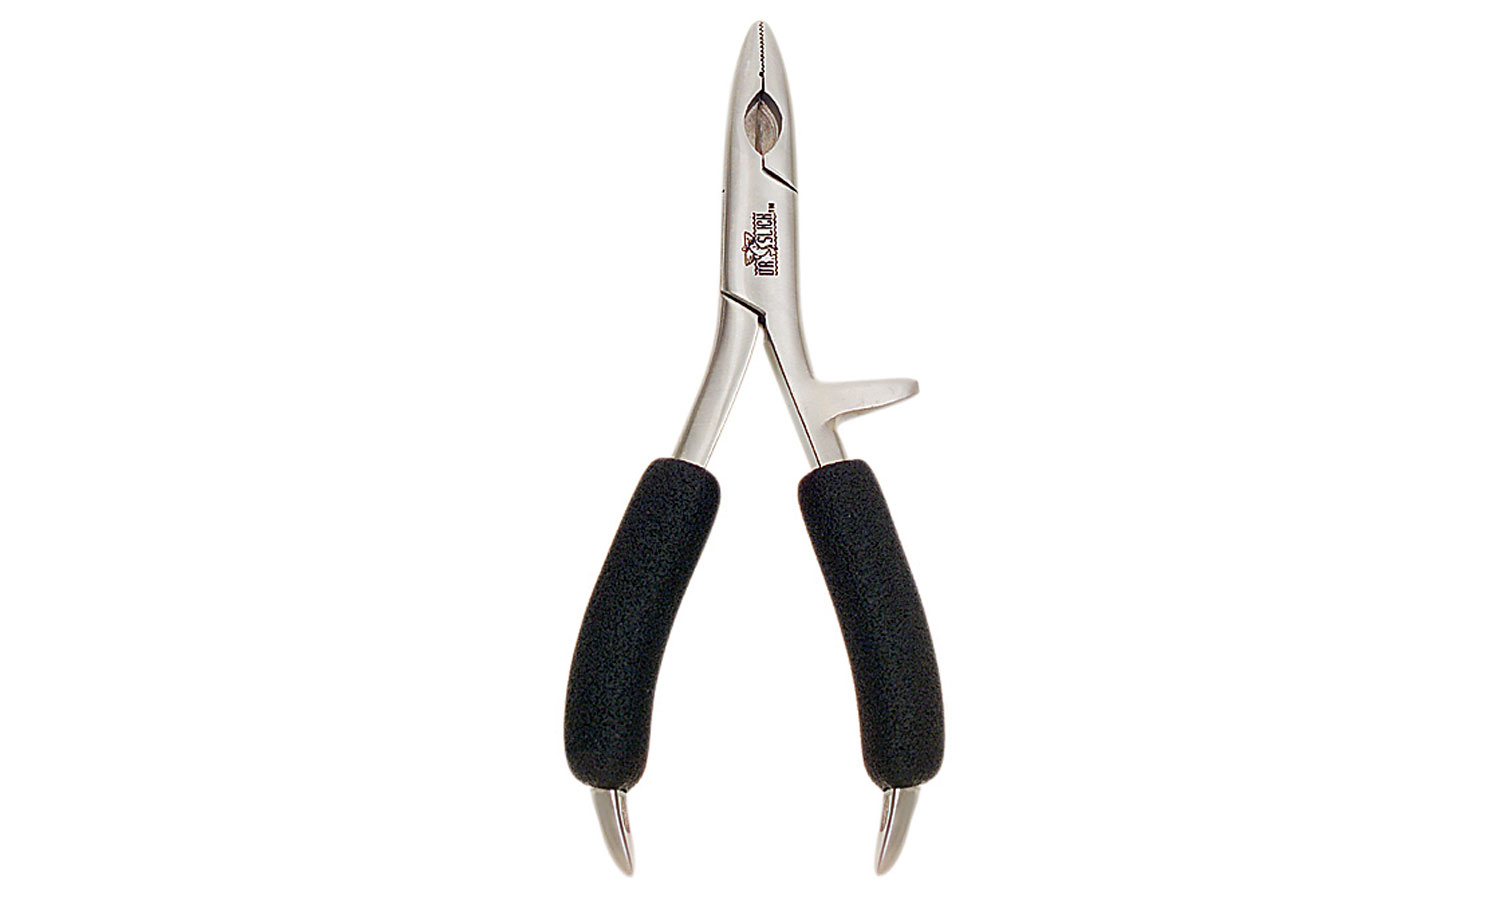 OLDE FLY SHOP LONG NOSE FISHING PLIERS FOR SALTWATER BARRACUDA